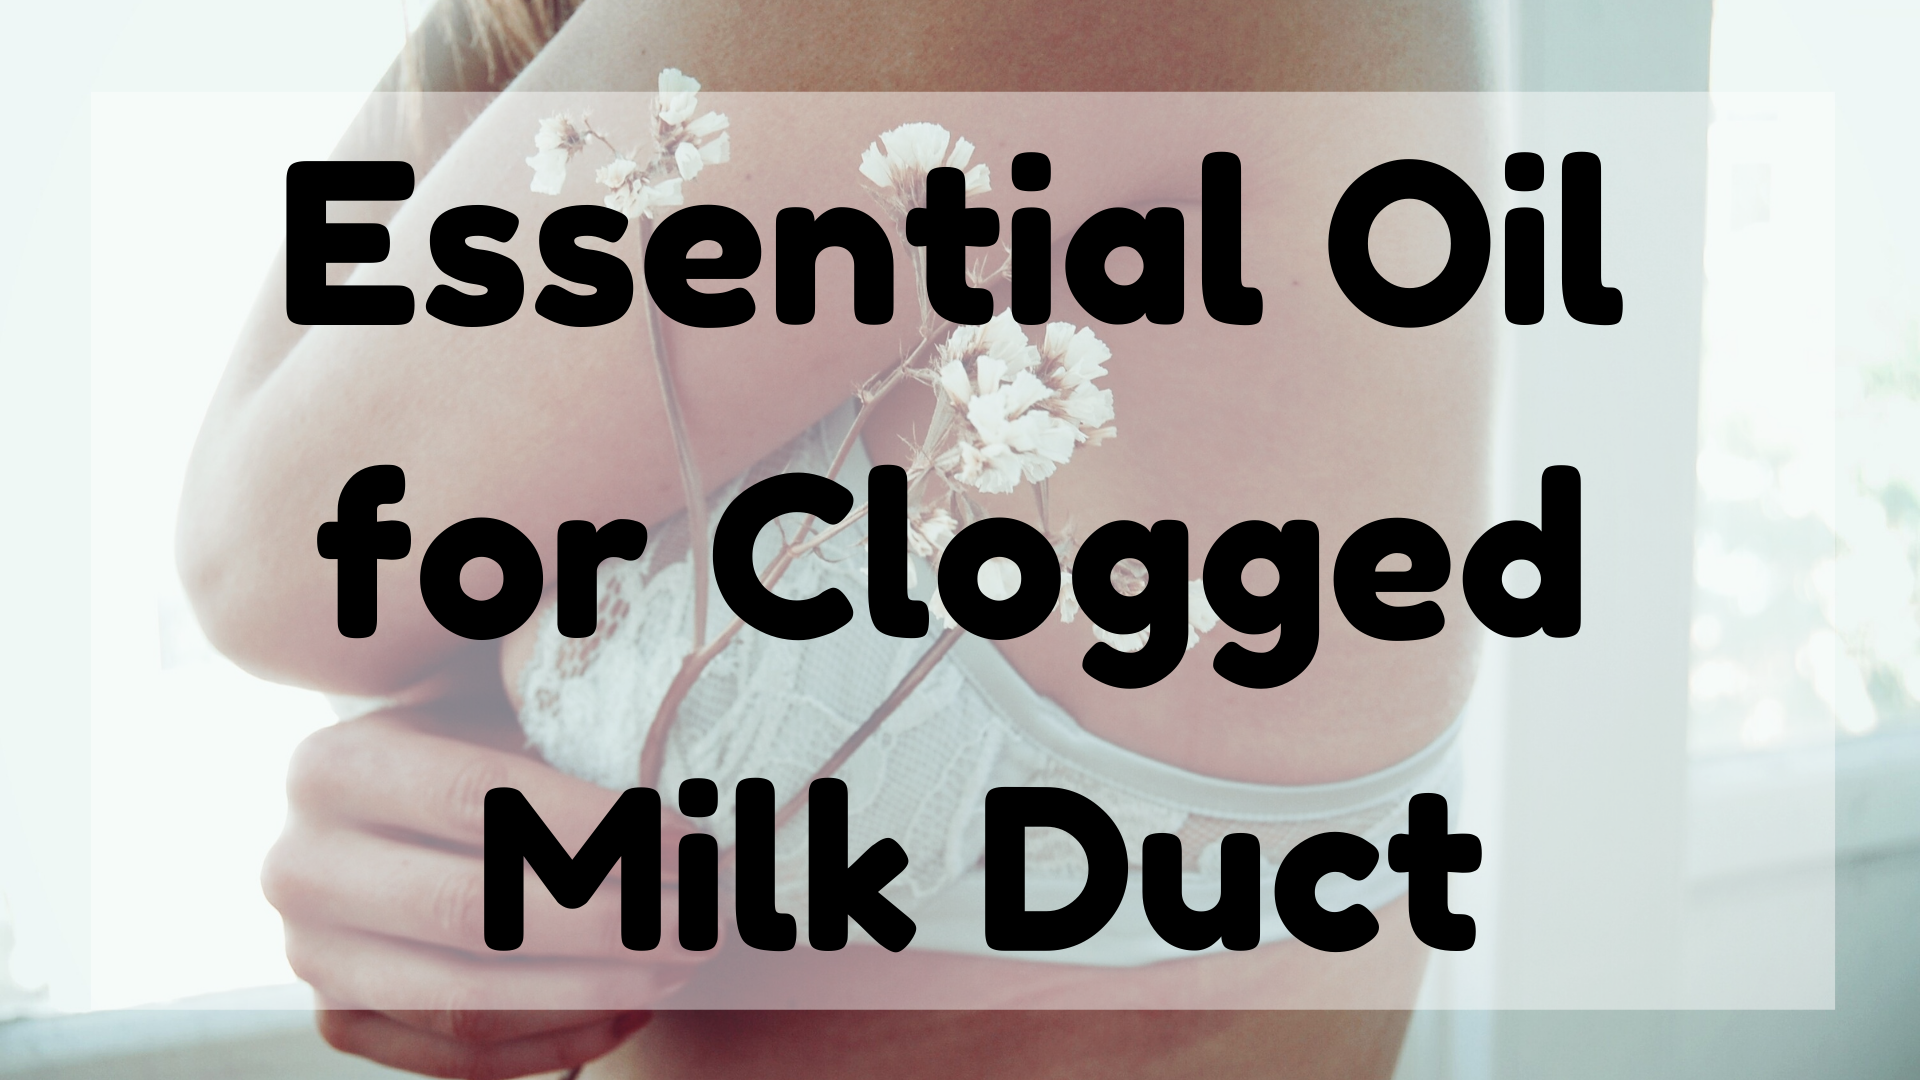 Essential Oil For Clogged Milk Duct